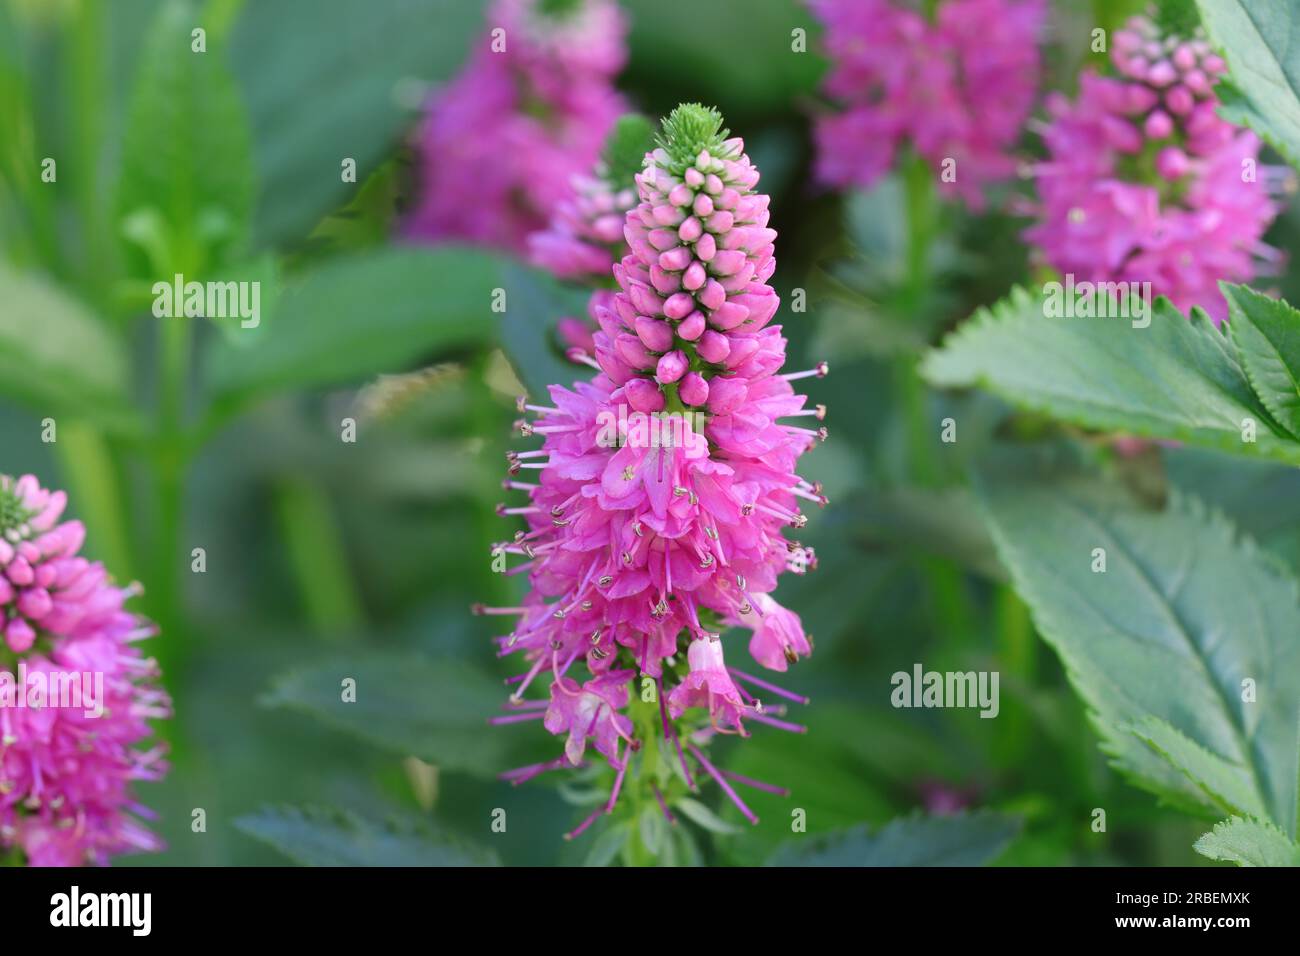 Close-up of a beautiful pink Veronica spicata flower in a garden bed, selcetive focus Stock Photo